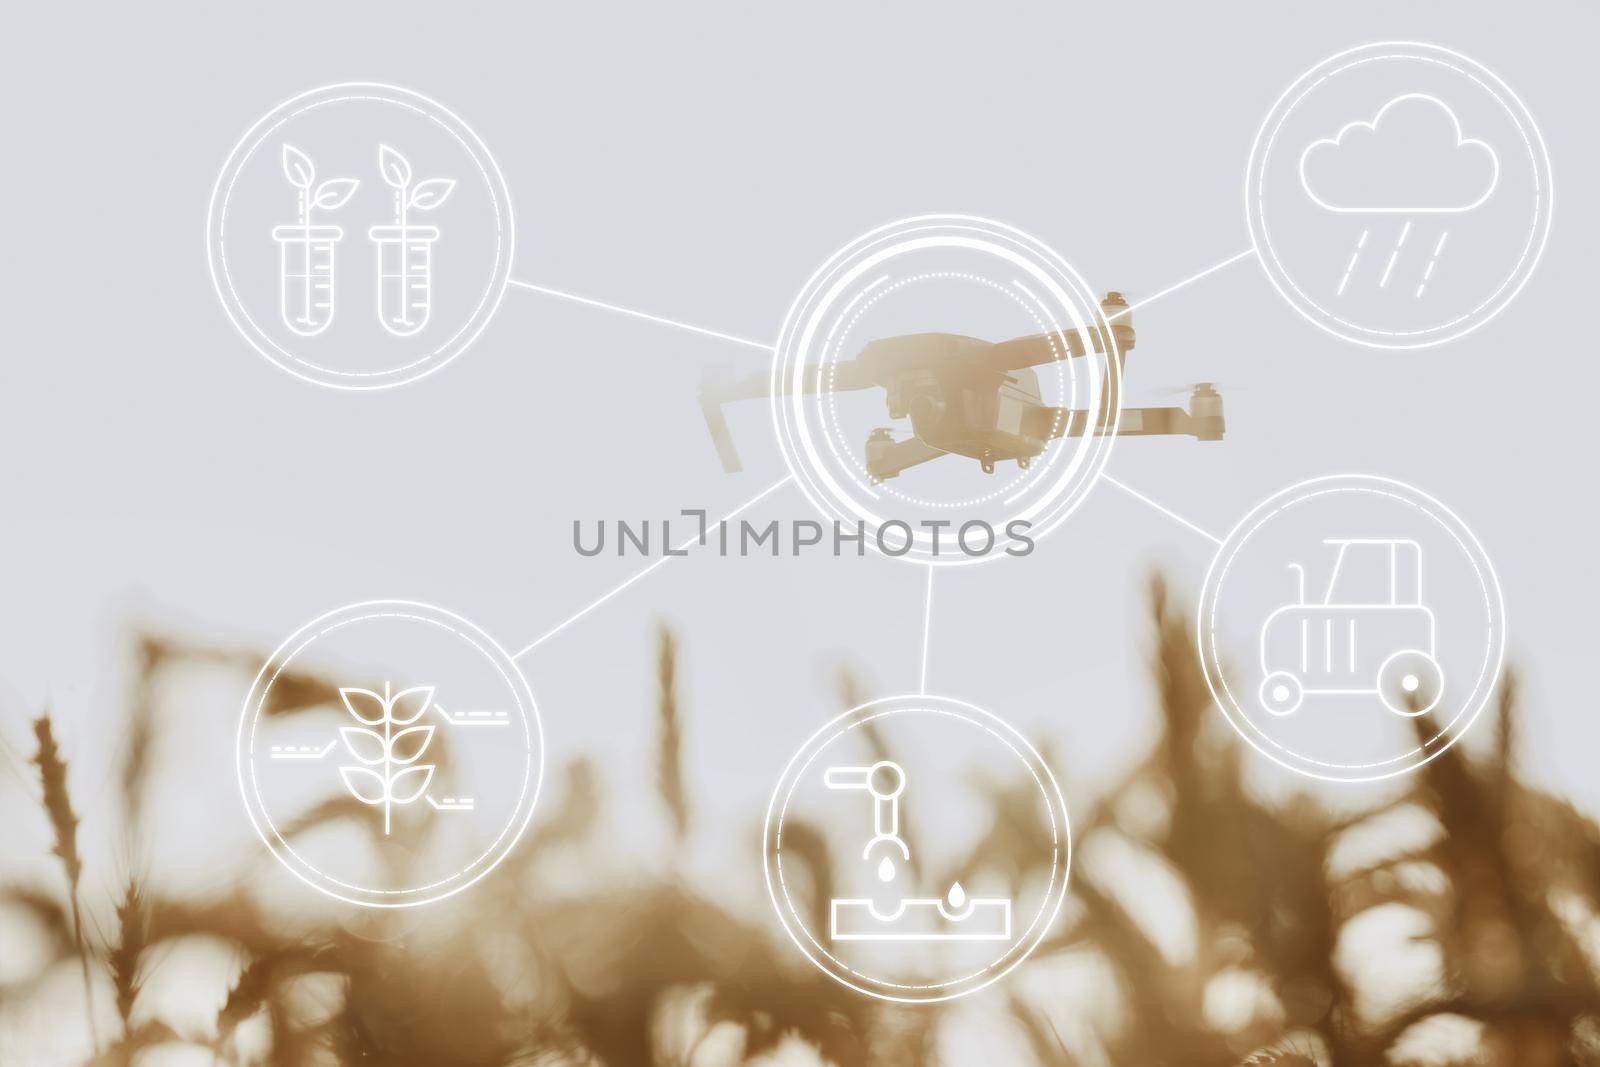 Flying drone above wheat field. Agricultural and technology innovations concept by Fabrikasimf